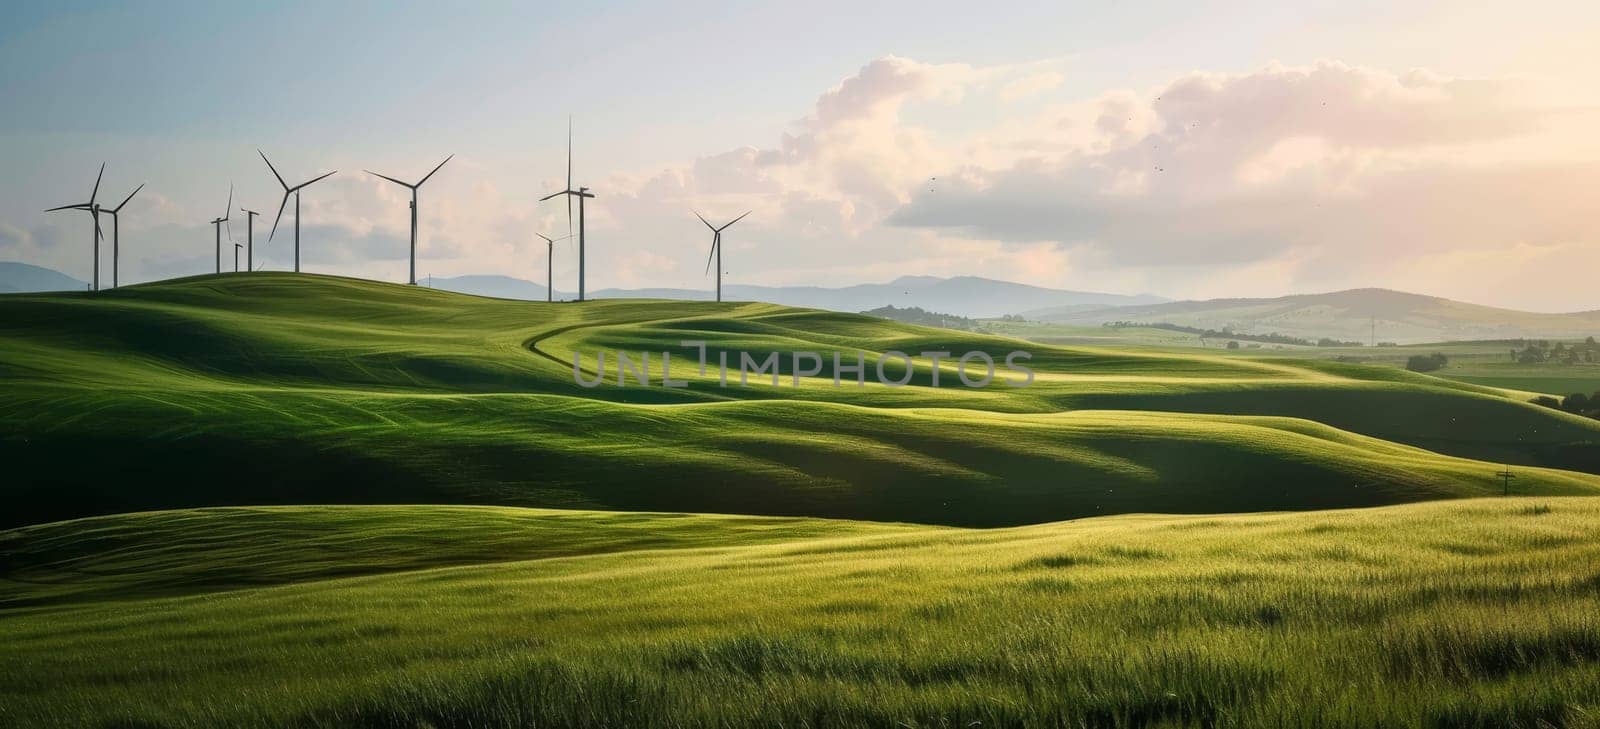 Wind turbines on green rolling hills under a cloudy sky, showcasing natural beauty and renewable energy